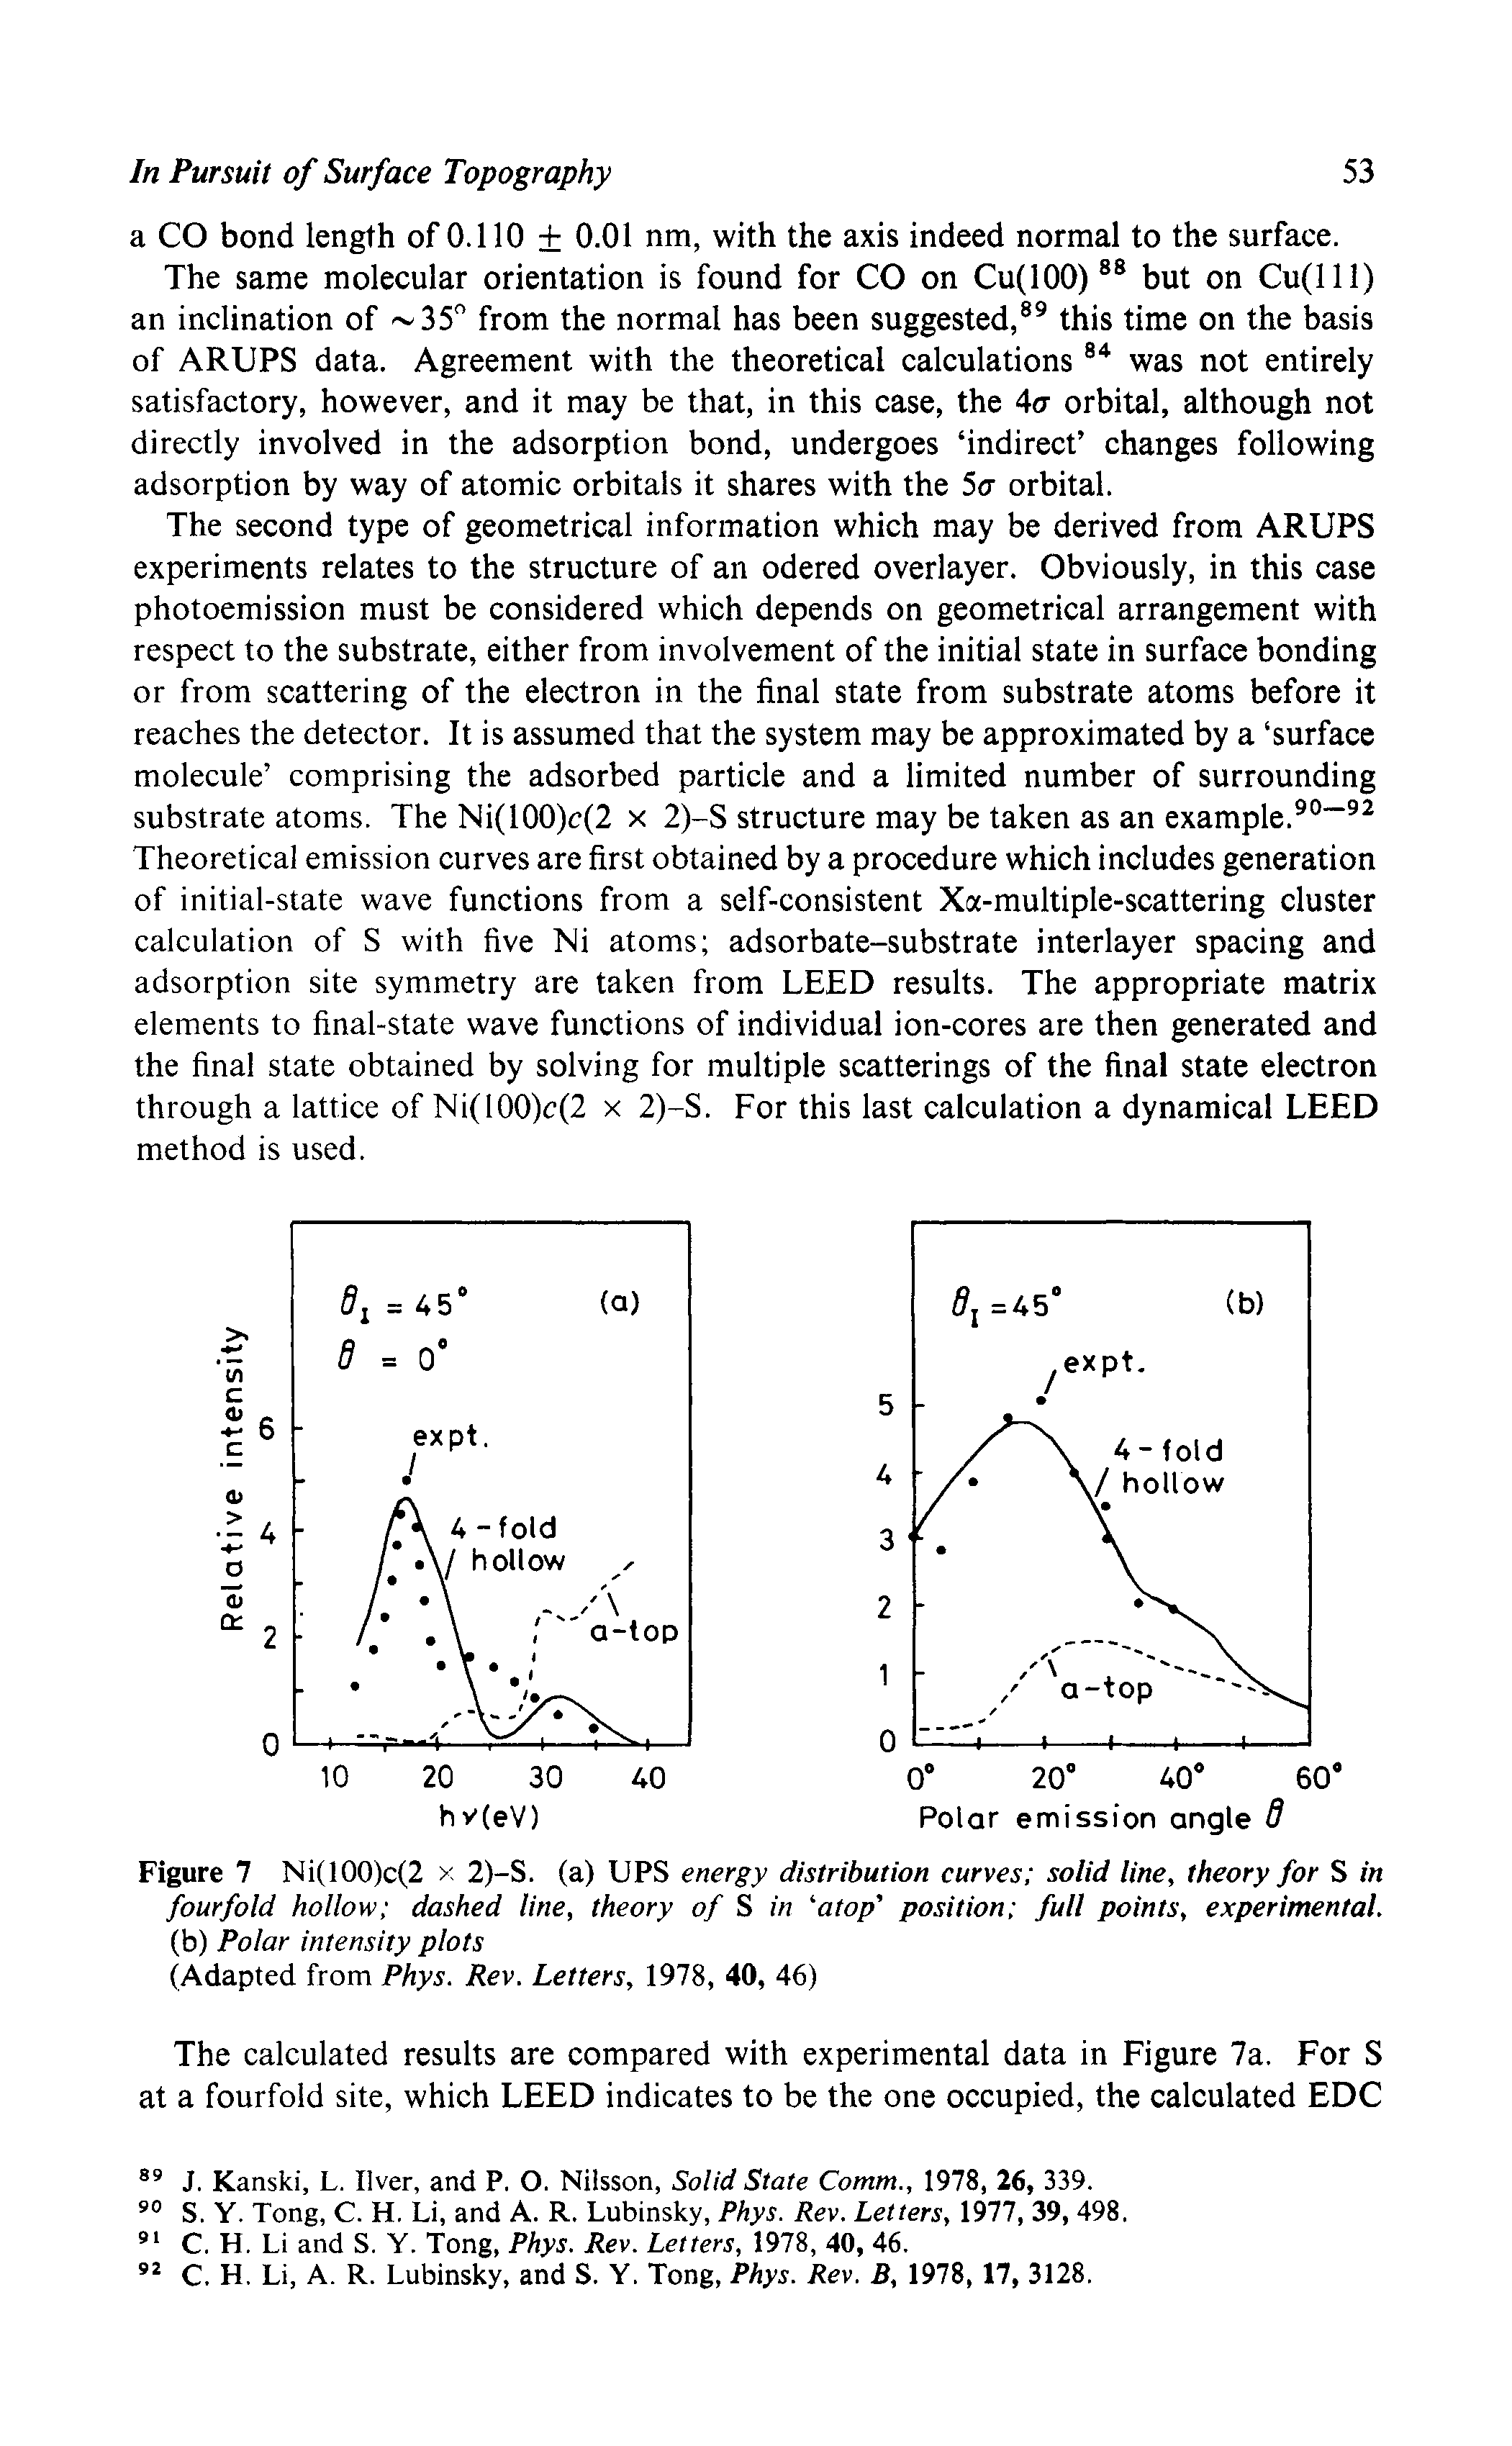 Figure 7 Ni(100)c(2 > 2)-S. (a) UPS energy distribution curves solid line, theory for S in fourfold hollow dashed line, theory of S in "atop position full points, experimental. (b) Polar intensity plots...